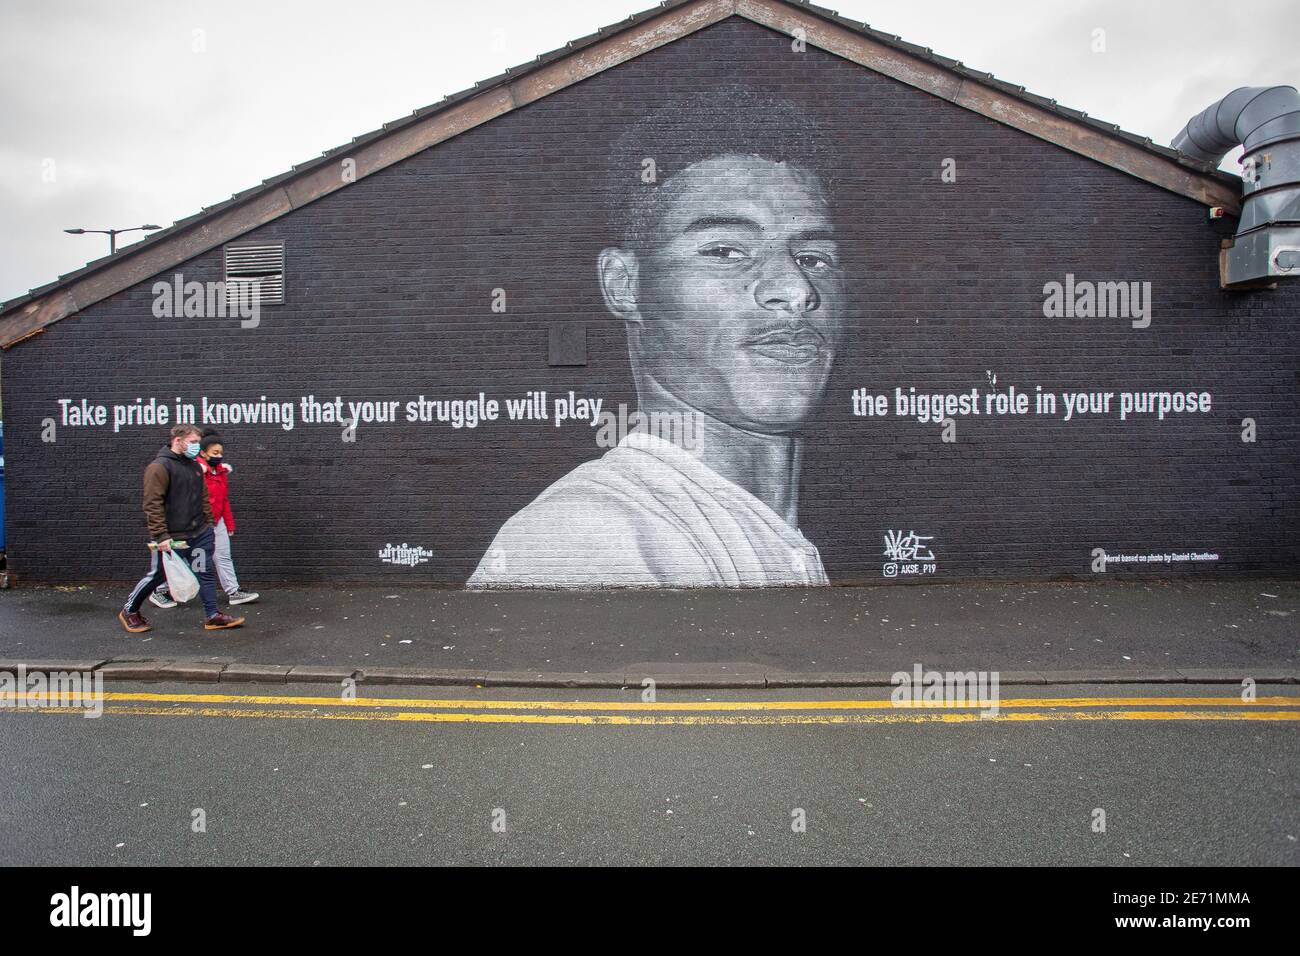 Pedestrians  passing the mural of Manchester United football player Marcus Rashford on the side of a building in Withington, Manchester. Stock Photo